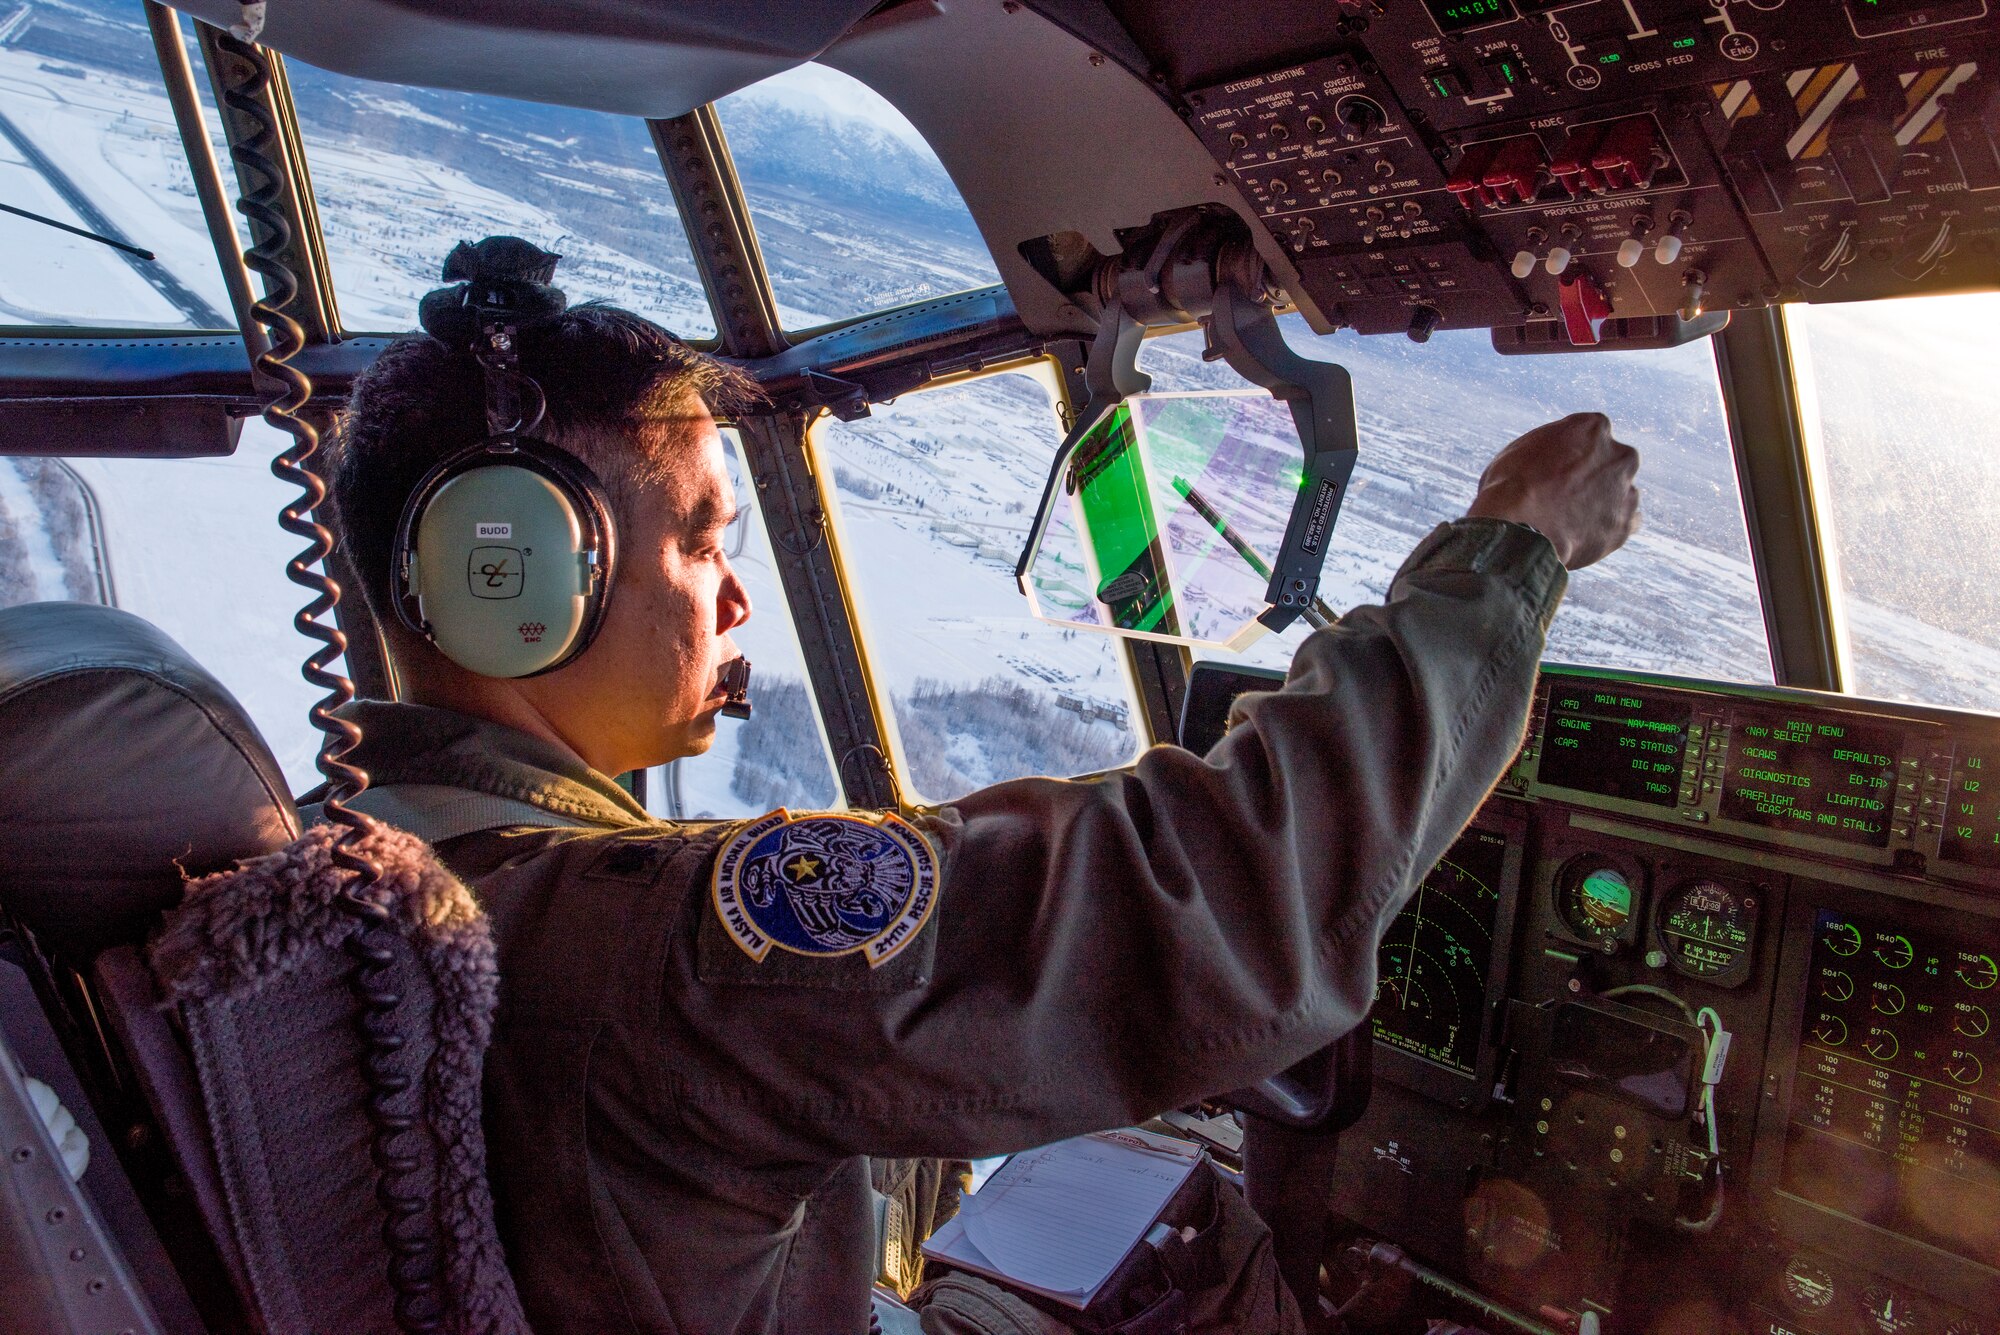 Lt.Col. Eric Budd, a pilot with the 211th Rescue Squadron, gives direction as the aircraft commander of a C130J "Combat King II" during an aerial damage assessment Nov. 30, 2018, flying over Southcentral Alaska. In a matter of hours, members of the Alaska Air National Guard's Maintenance and Operation groups turned a planned community engagement into an aerial survey of earthquake damage, reporting findings to the State of Alaska's Joint Operations Center.